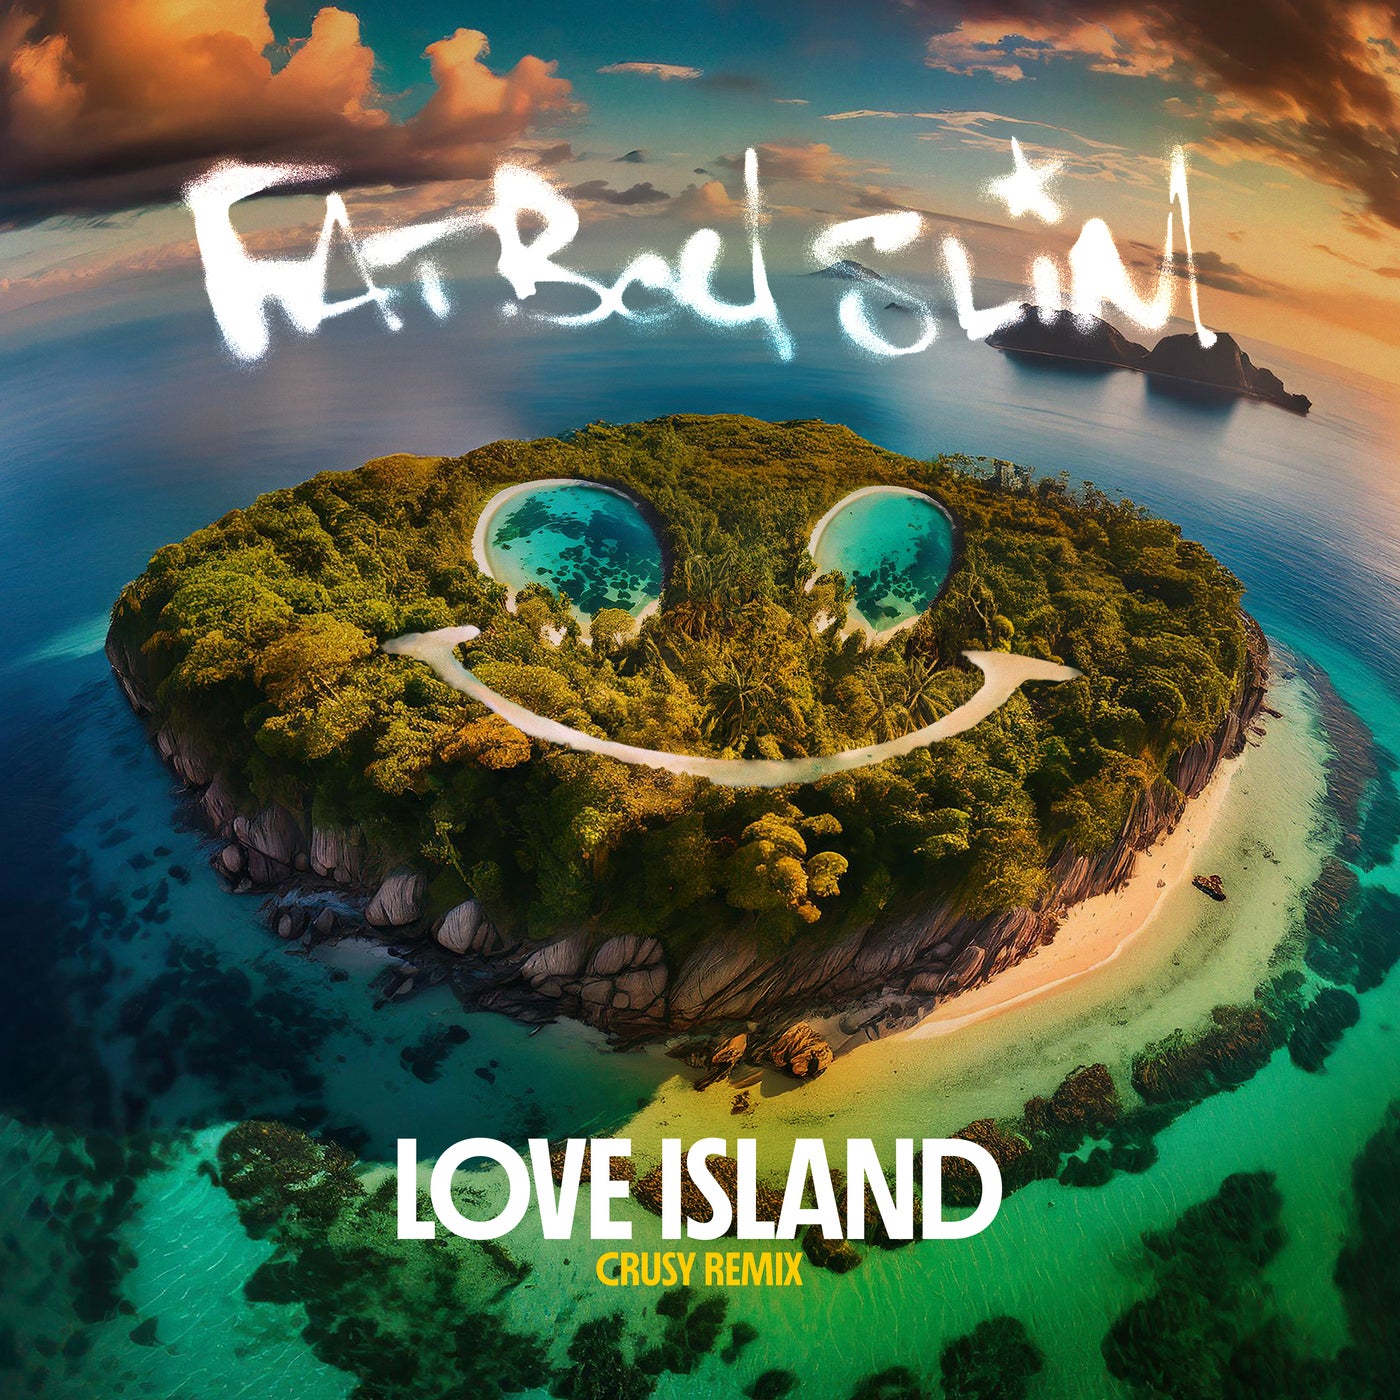 image cover: Fatboy Slim - Love Island (Crusy Remix) on Skint Records